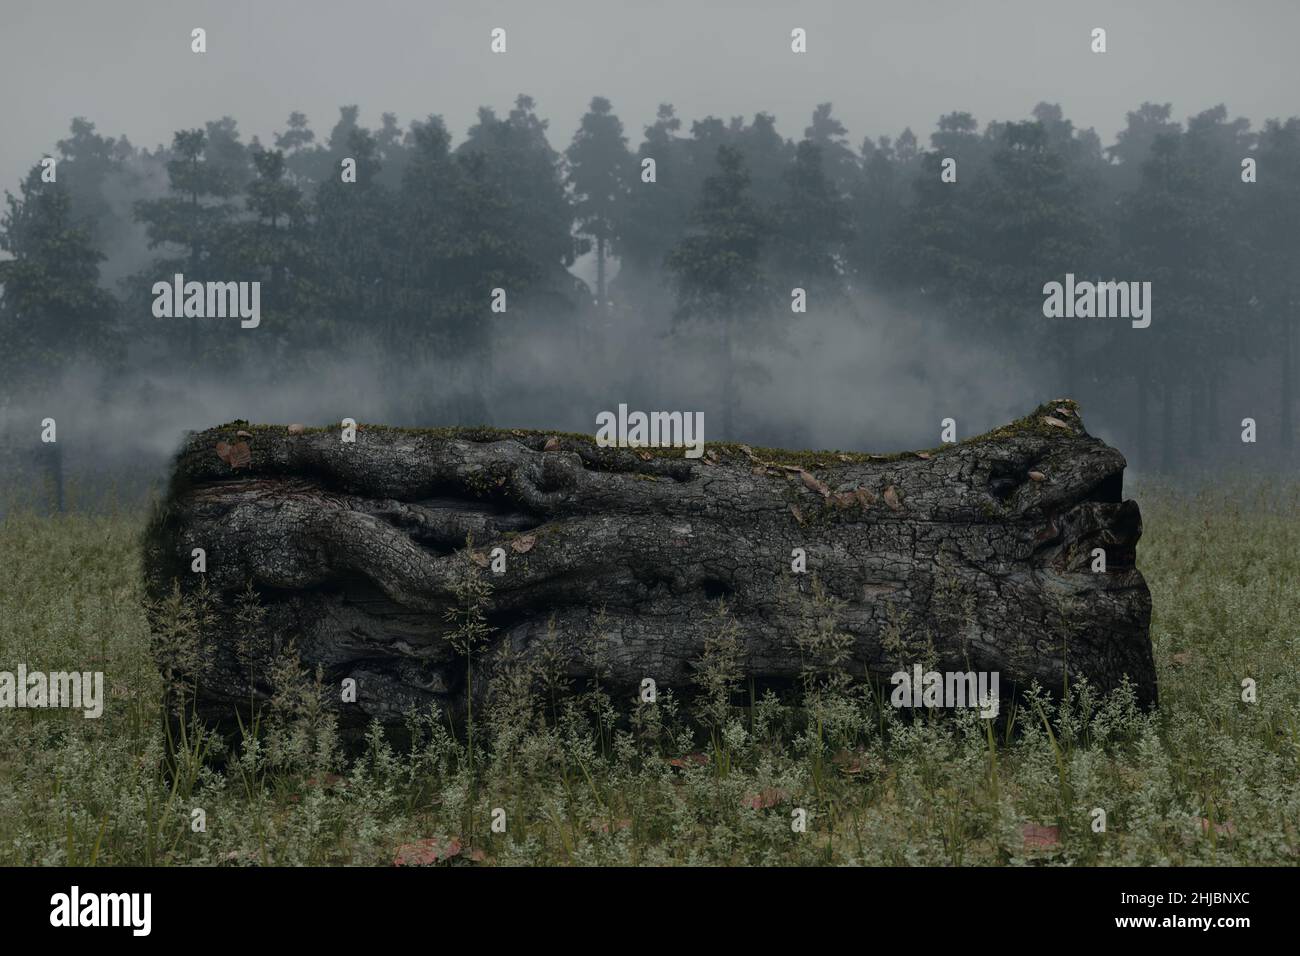 3d rendering of laying old apple tree in front of foggy forest Stock Photo